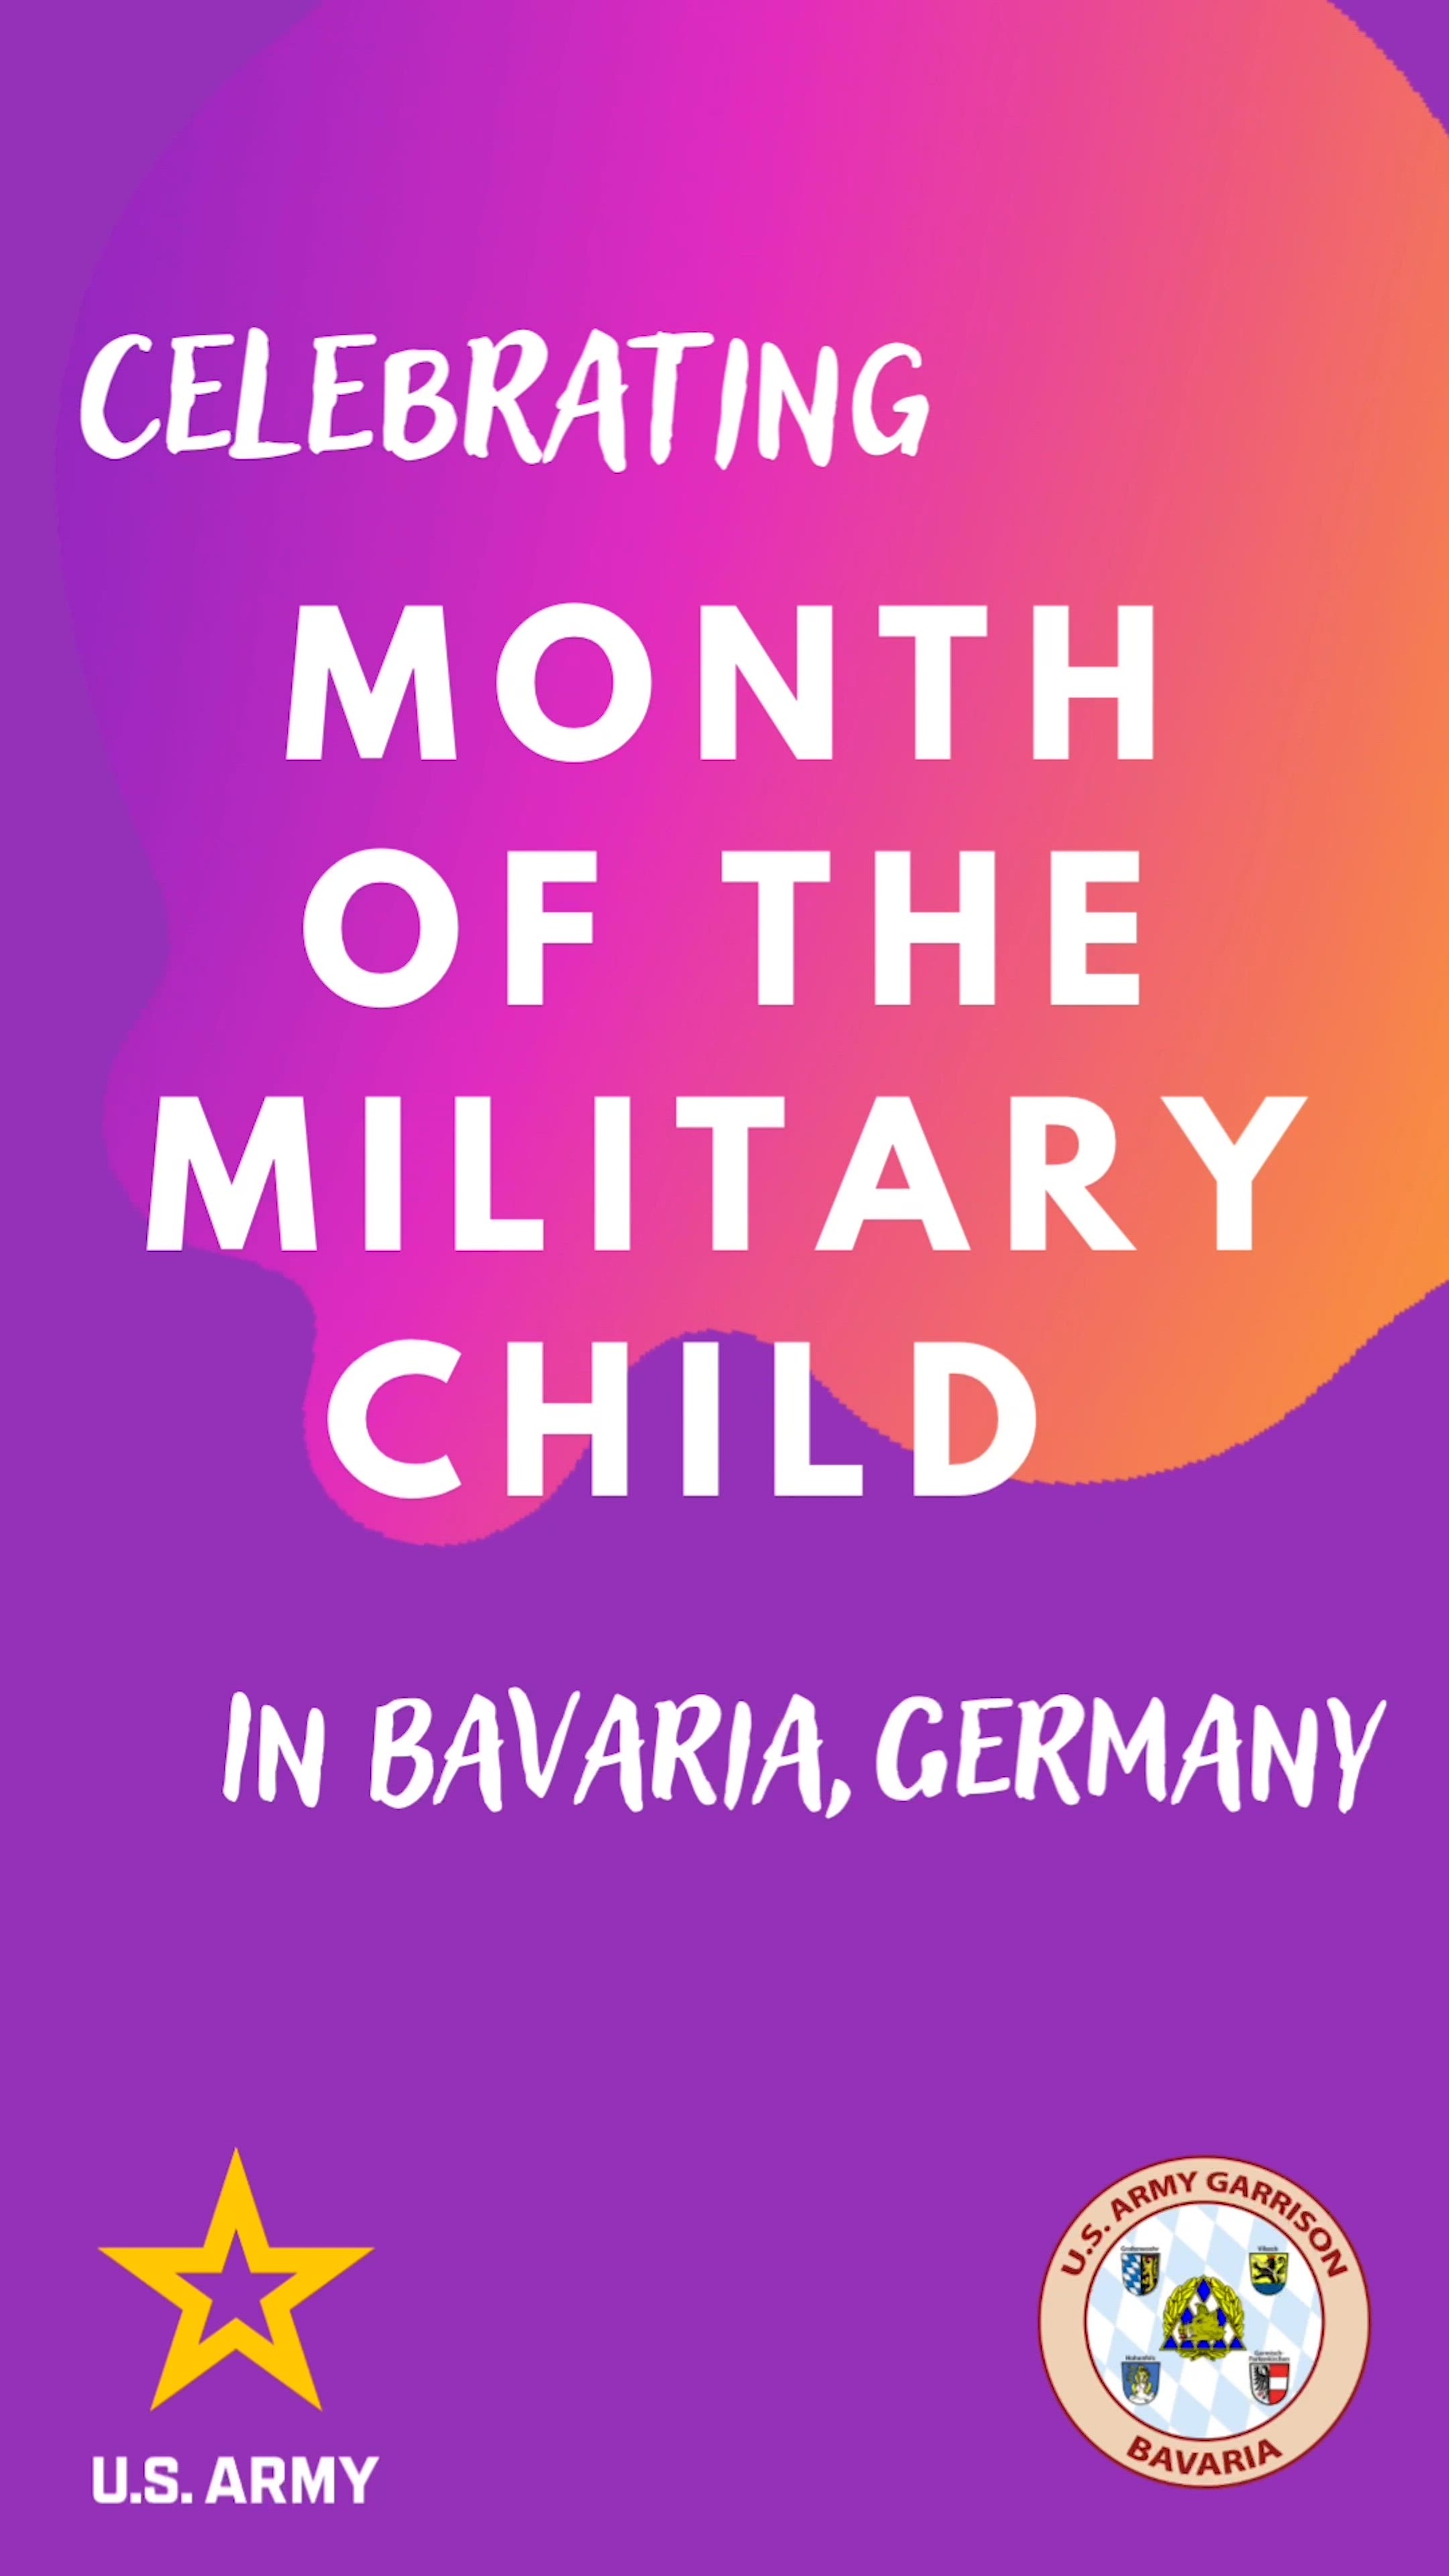 Of Course I'm a Military Child social media video to celebrate Month of the Military Child at U.S. Army Garrison Bavaria. 

Special thank you to Vilseck High School students.